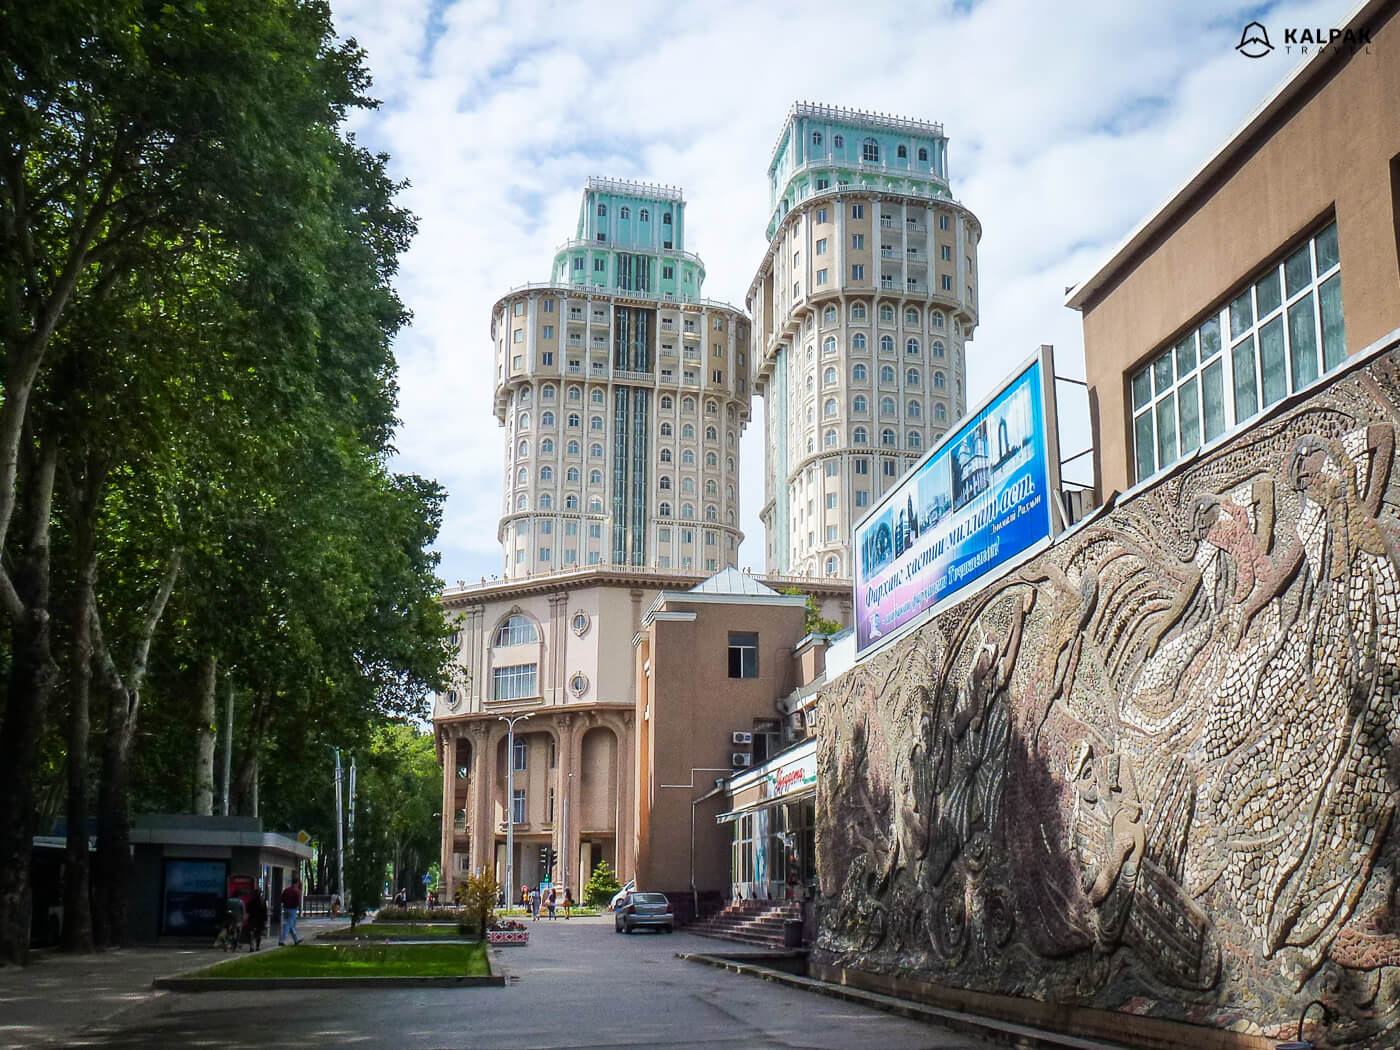 Dushanbe Plaza or high twin buildings in Dushanbe